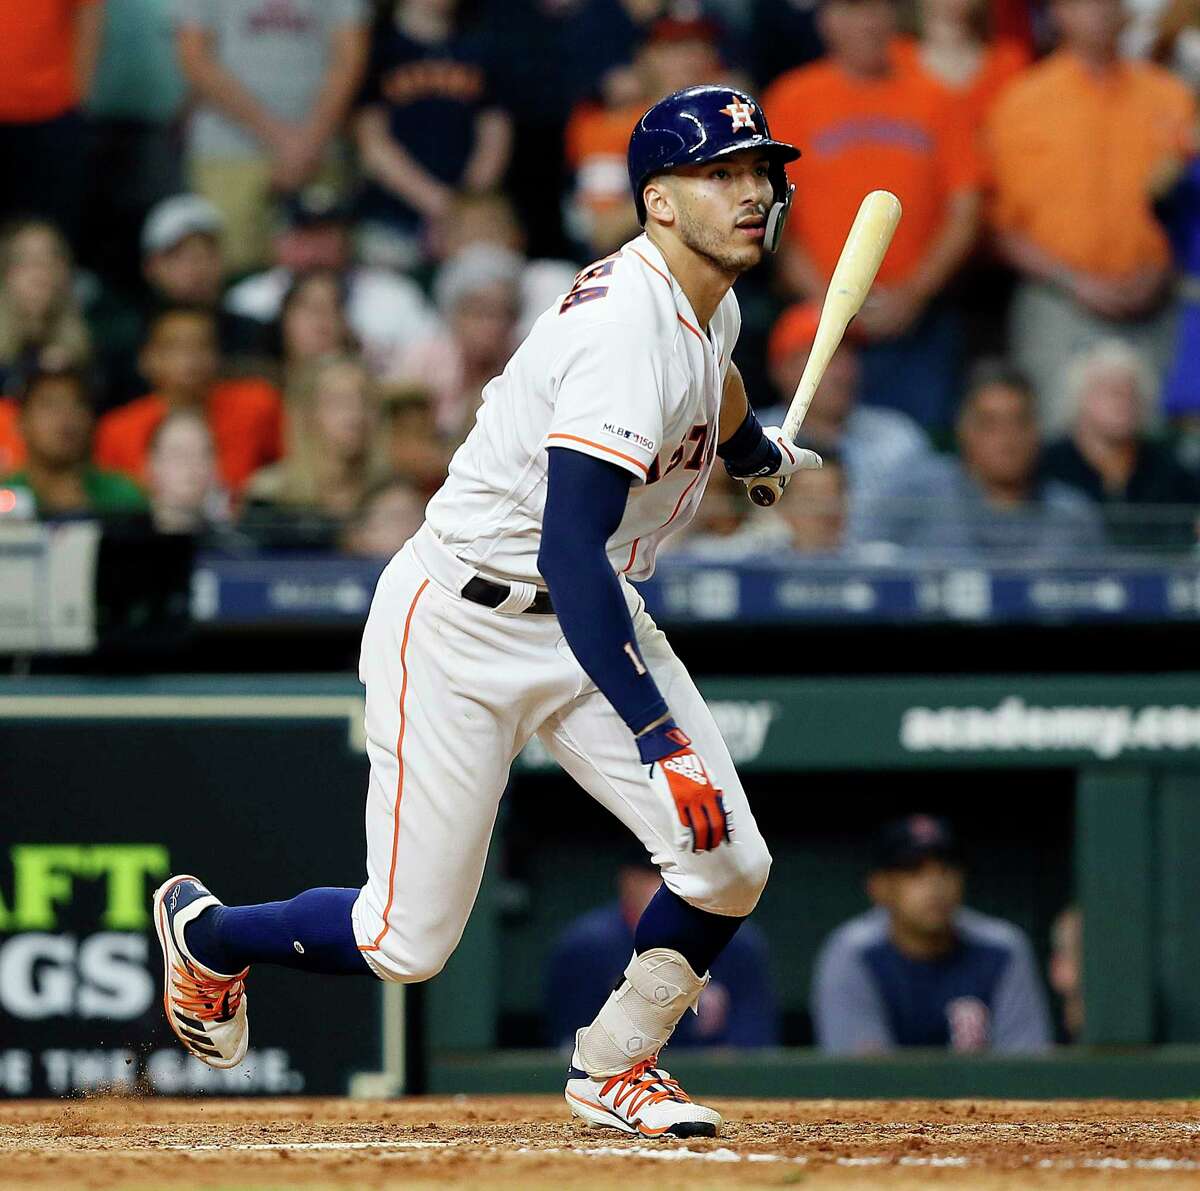 HOUSTON, TEXAS - MAY 25: Carlos Correa #1 of the Houston Astros hits a walk off single in the ninth inning against the Boston Red Sox at Minute Maid Park on May 25, 2019 in Houston, Texas. (Photo by Bob Levey/Getty Images)